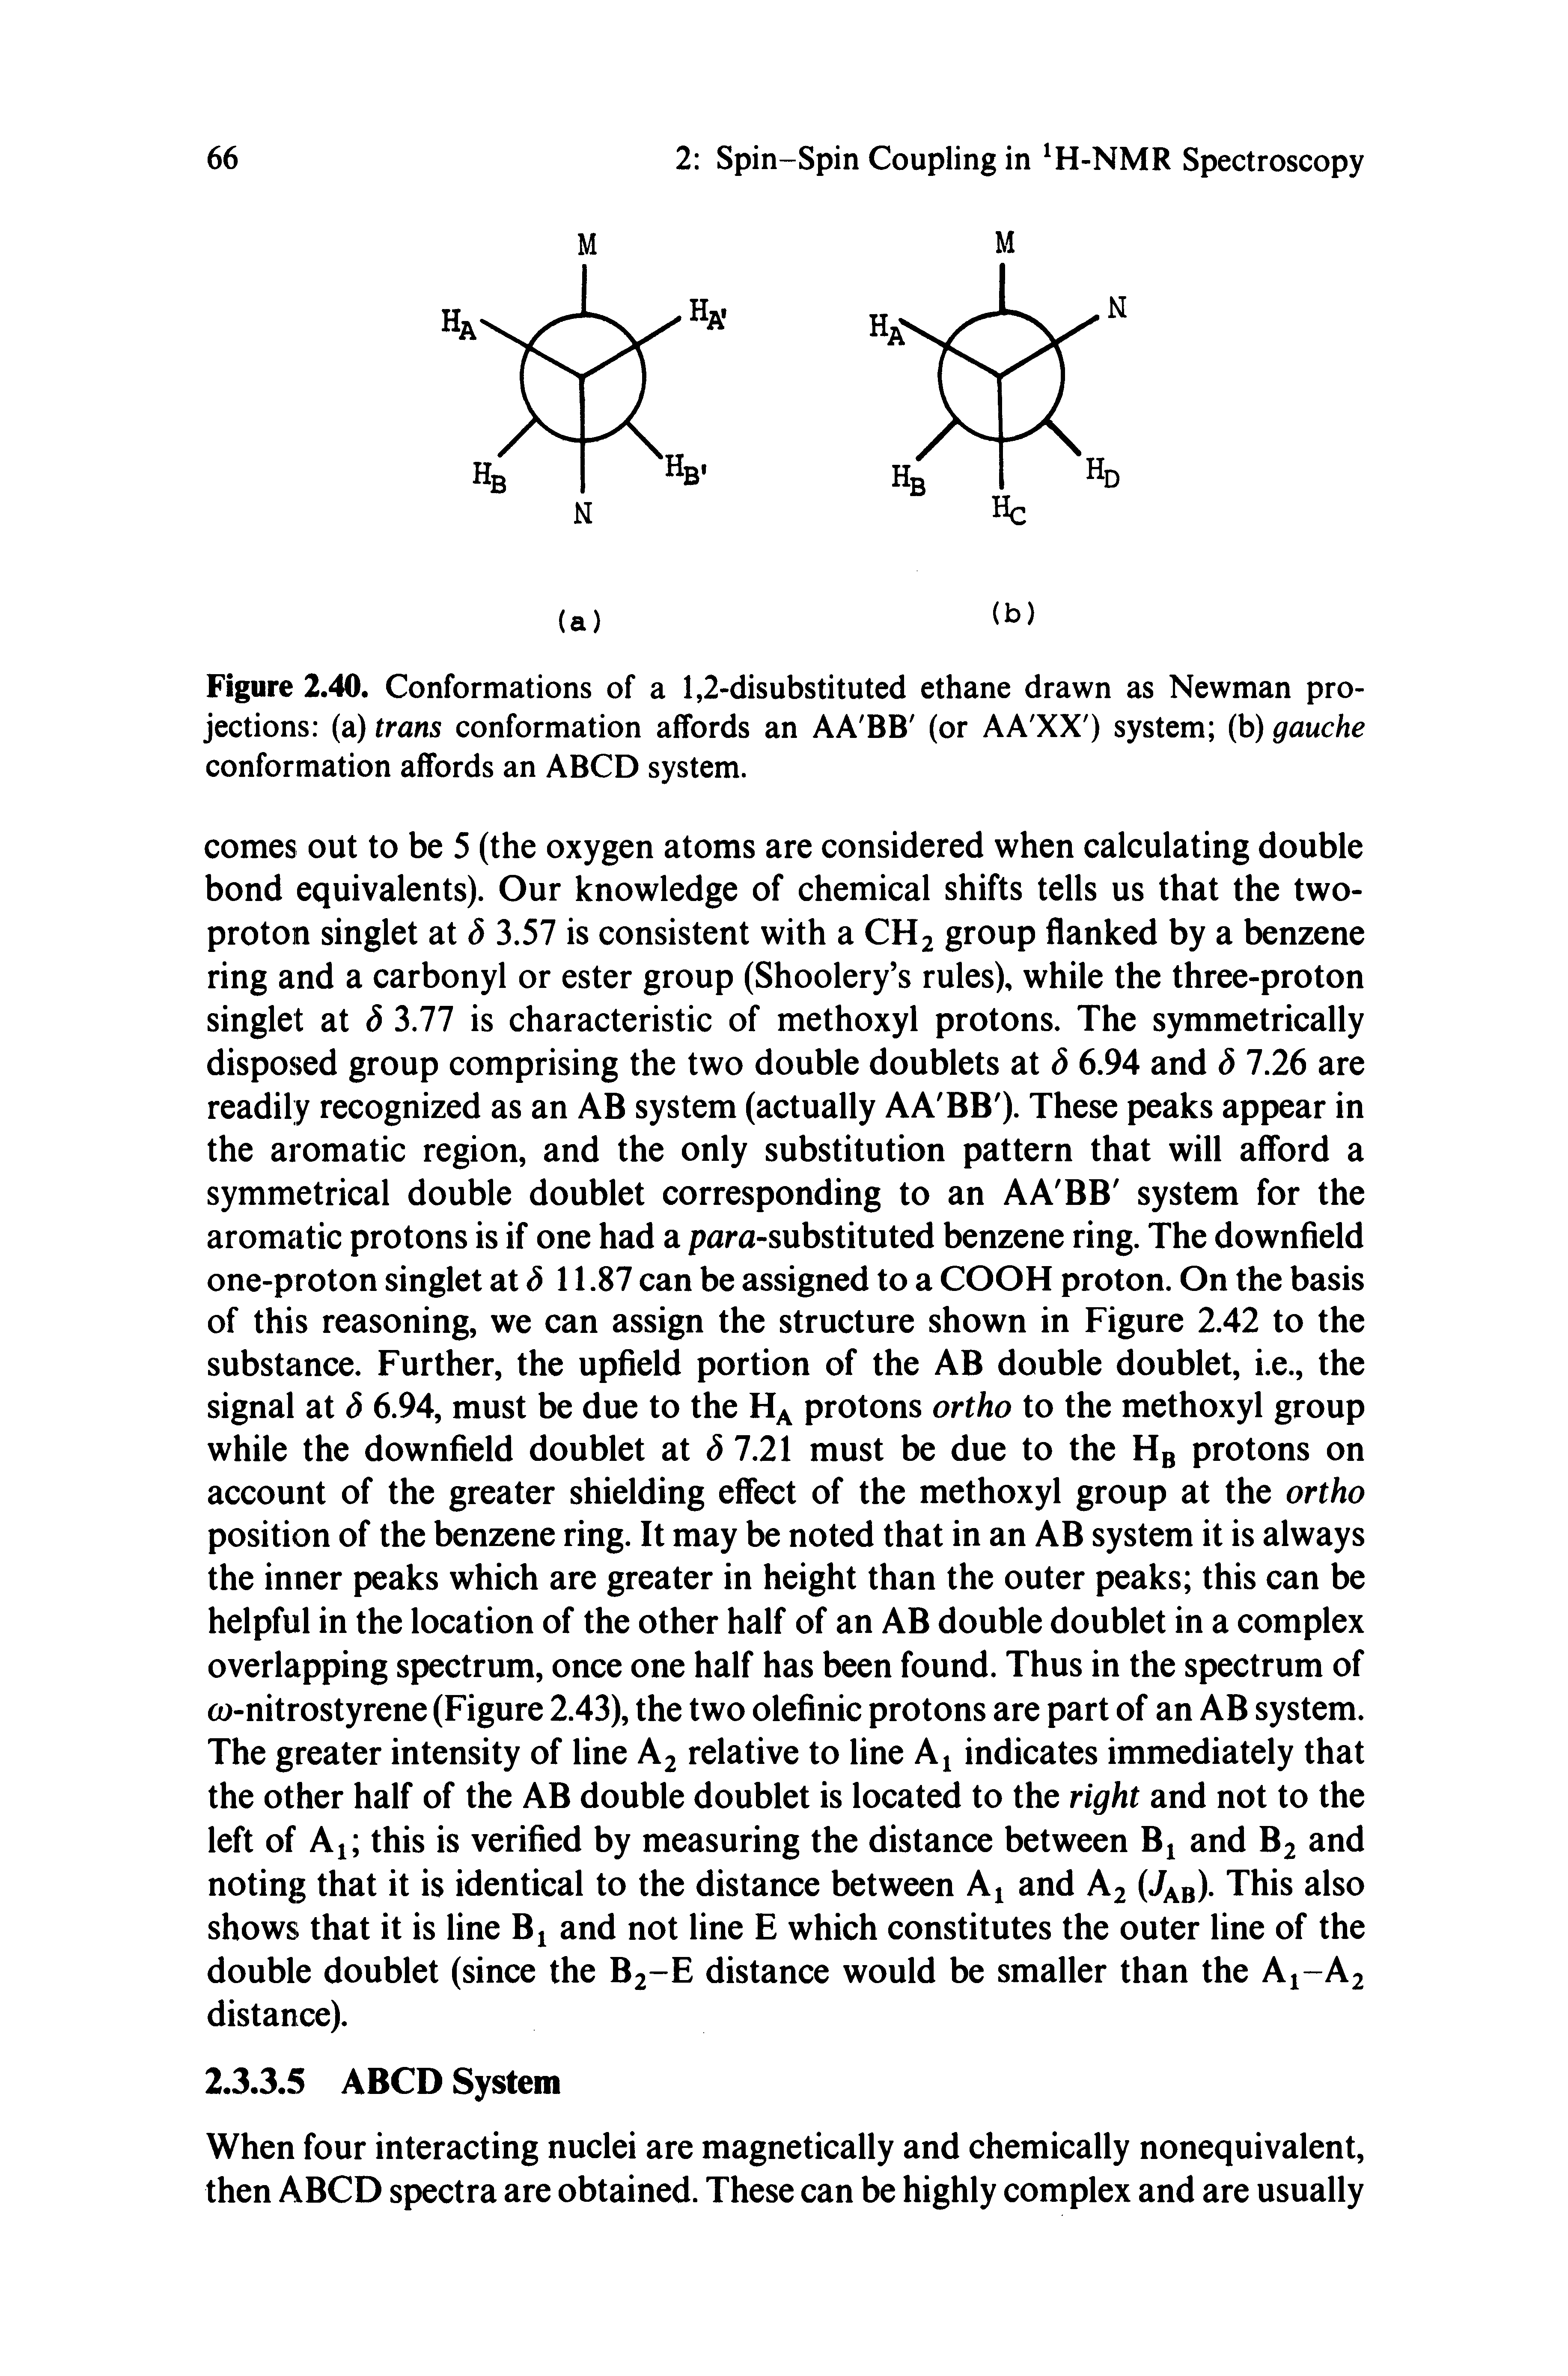 Figure 2.40. Conformations of a 1,2-disubstituted ethane drawn as Newman projections (a) trans conformation affords an AA BB (or AA XX ) system (b) gauche conformation affords an ABCD system.